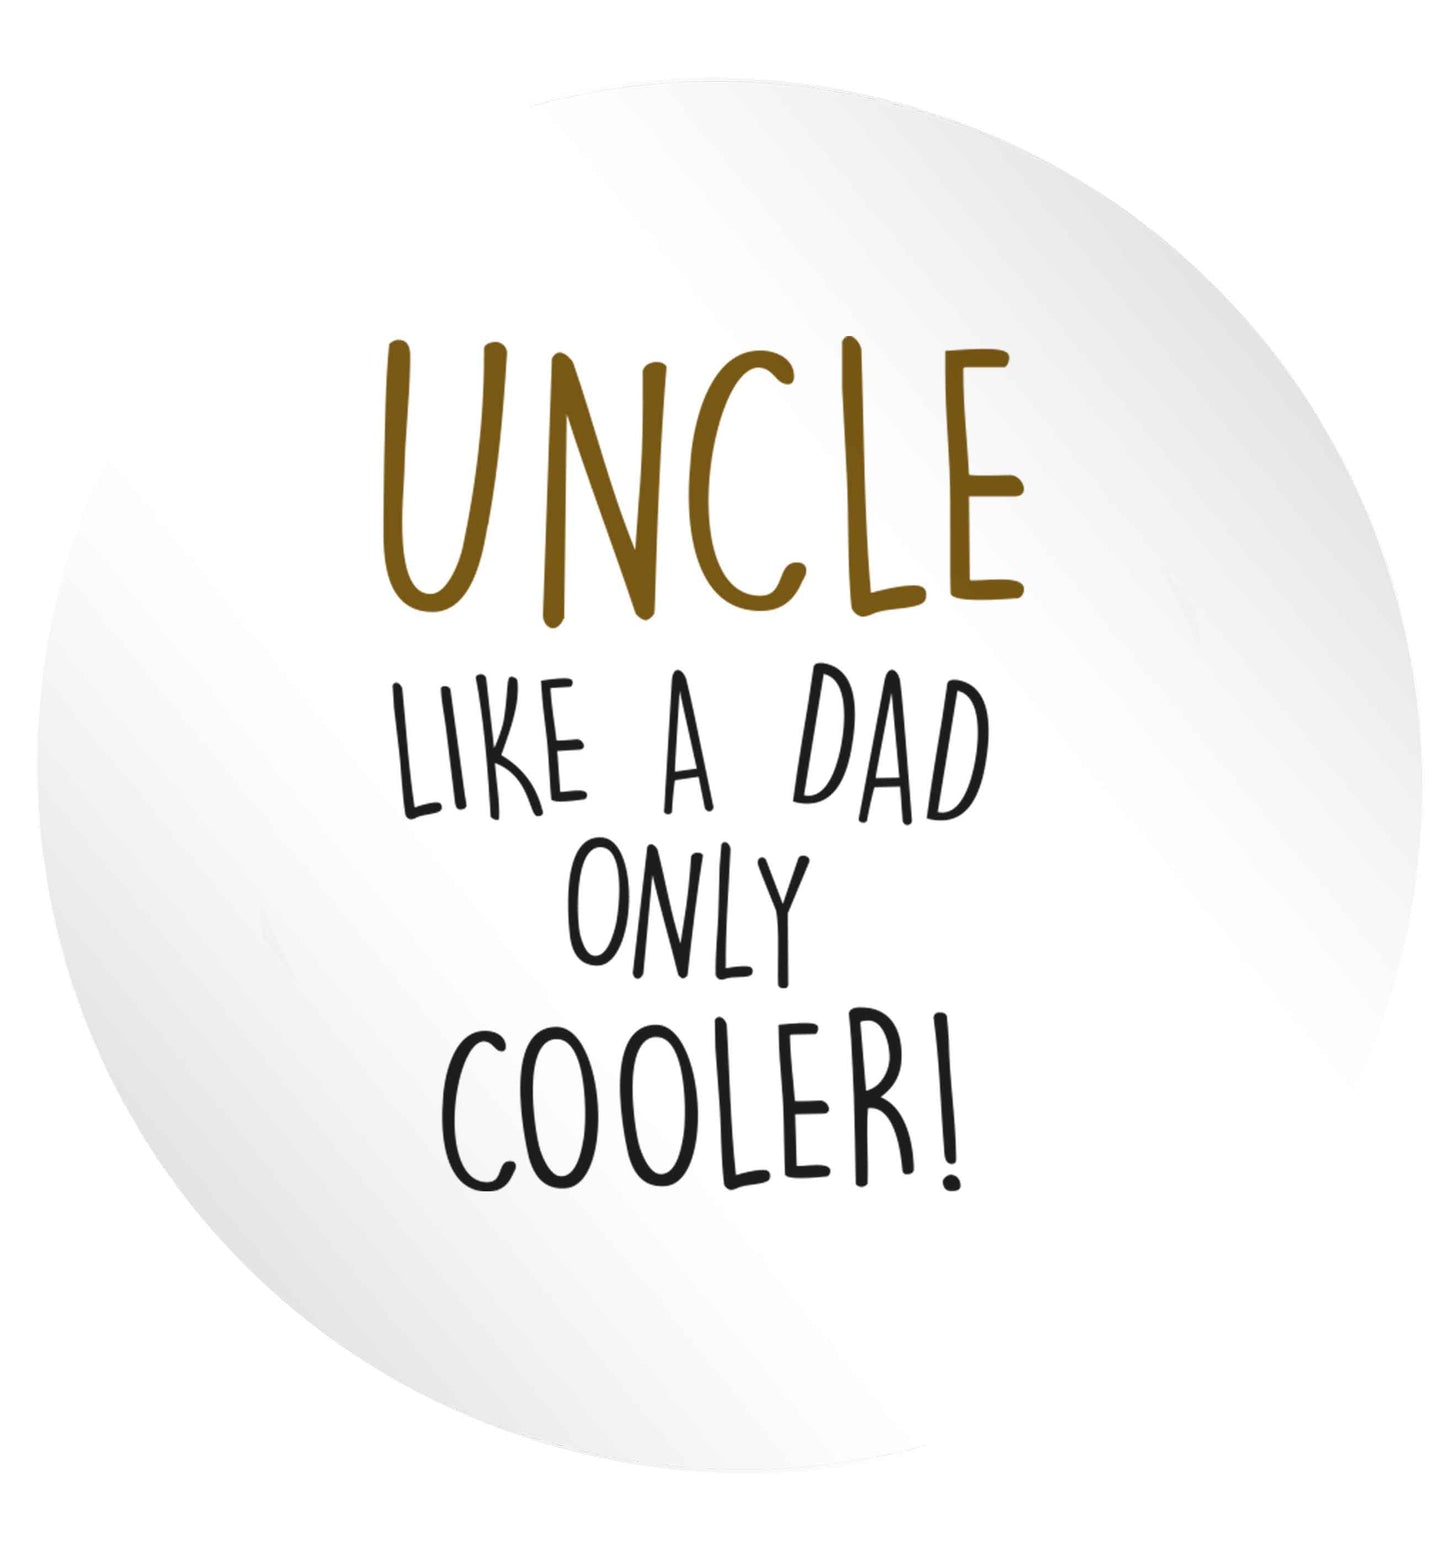 Uncle like a dad only cooler 24 @ 45mm matt circle stickers